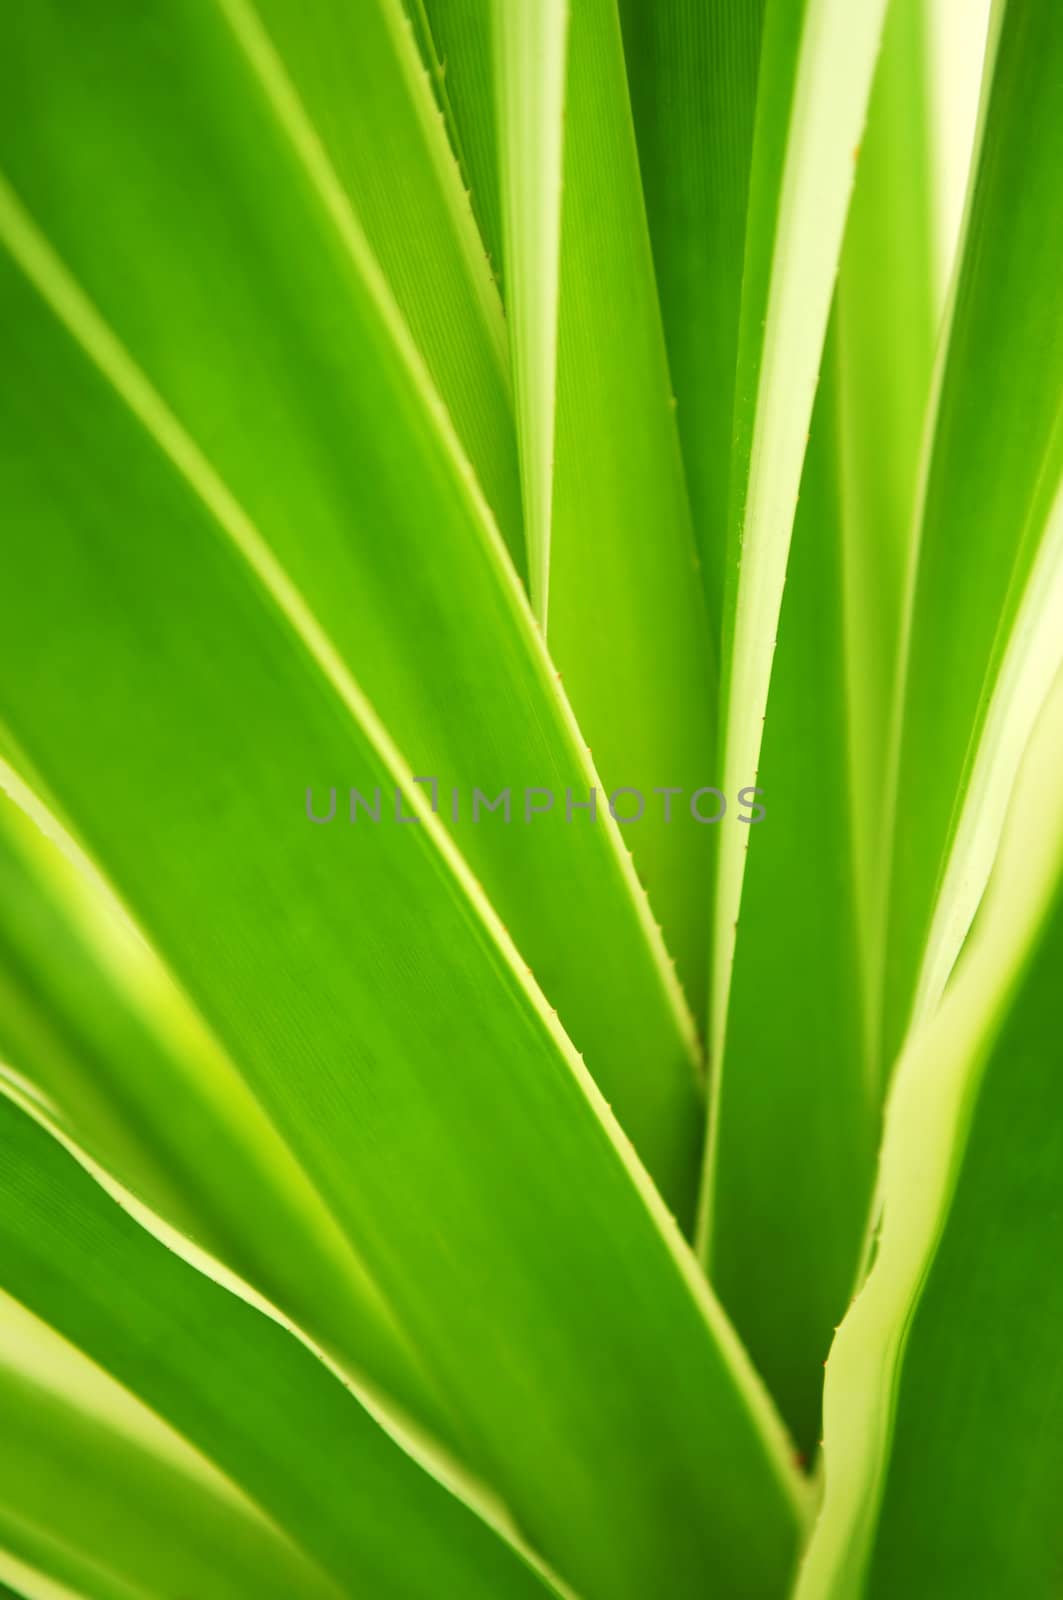 Closeup on green leaves of tropical plant